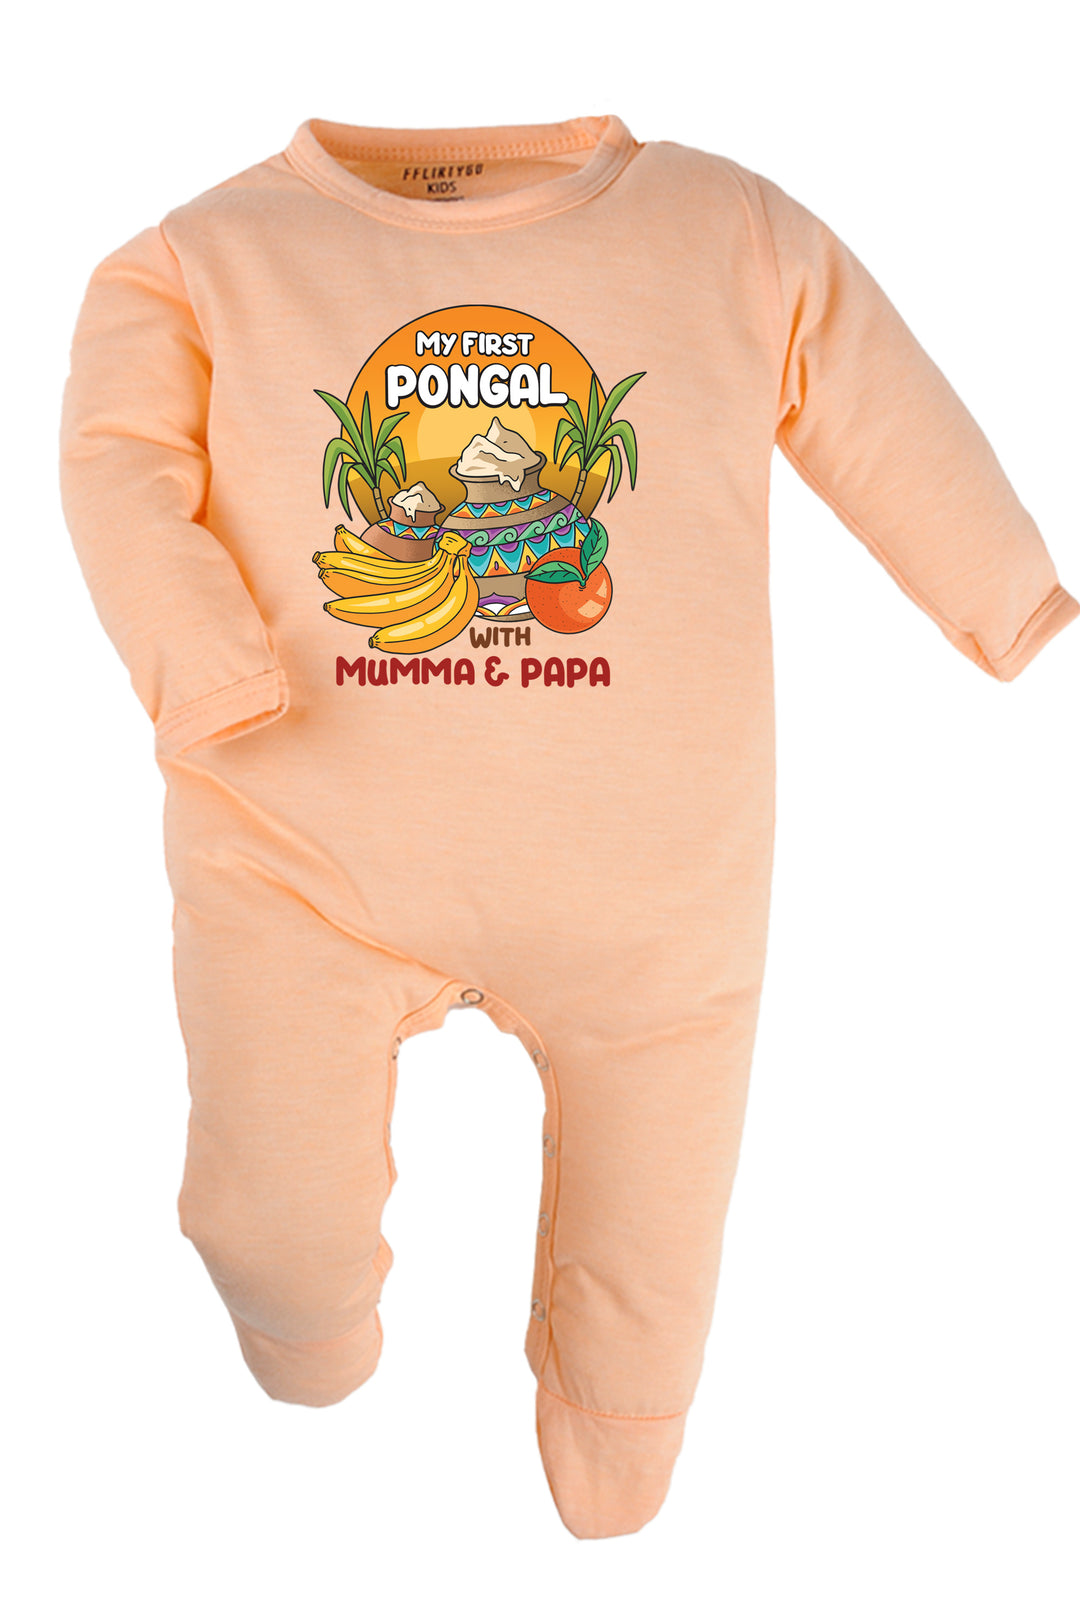 My First Pongal With Mumma & Papa Baby Romper | Onesies